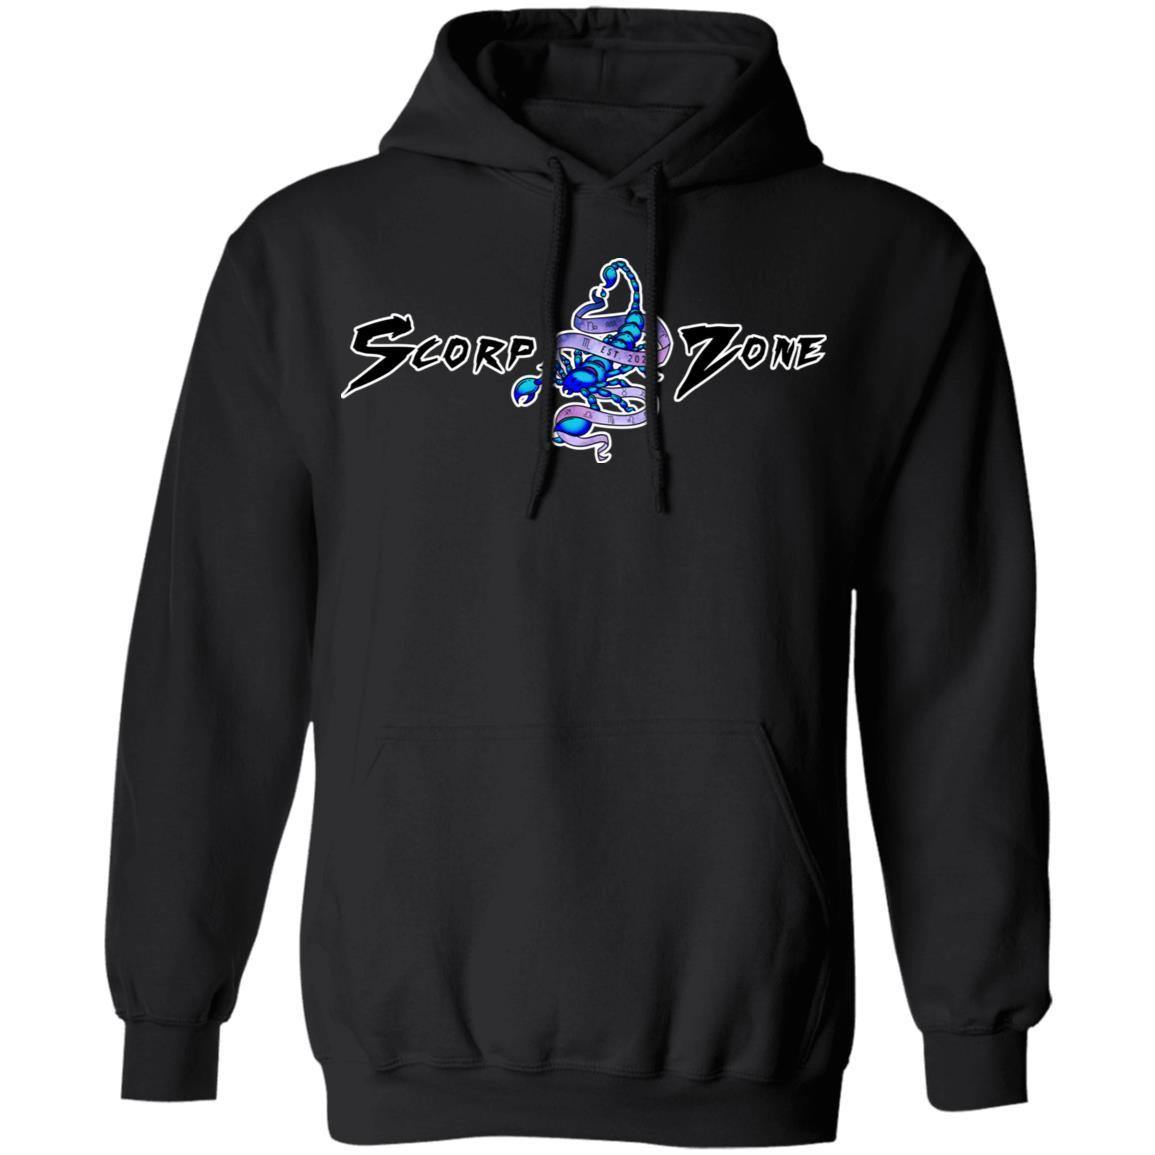 SAGITTARIUS DESIGN ON BACK AND SMALL SCORP ZONE LOGO ON FRONT - Z66 Pullover Hoodie - ScorpZone